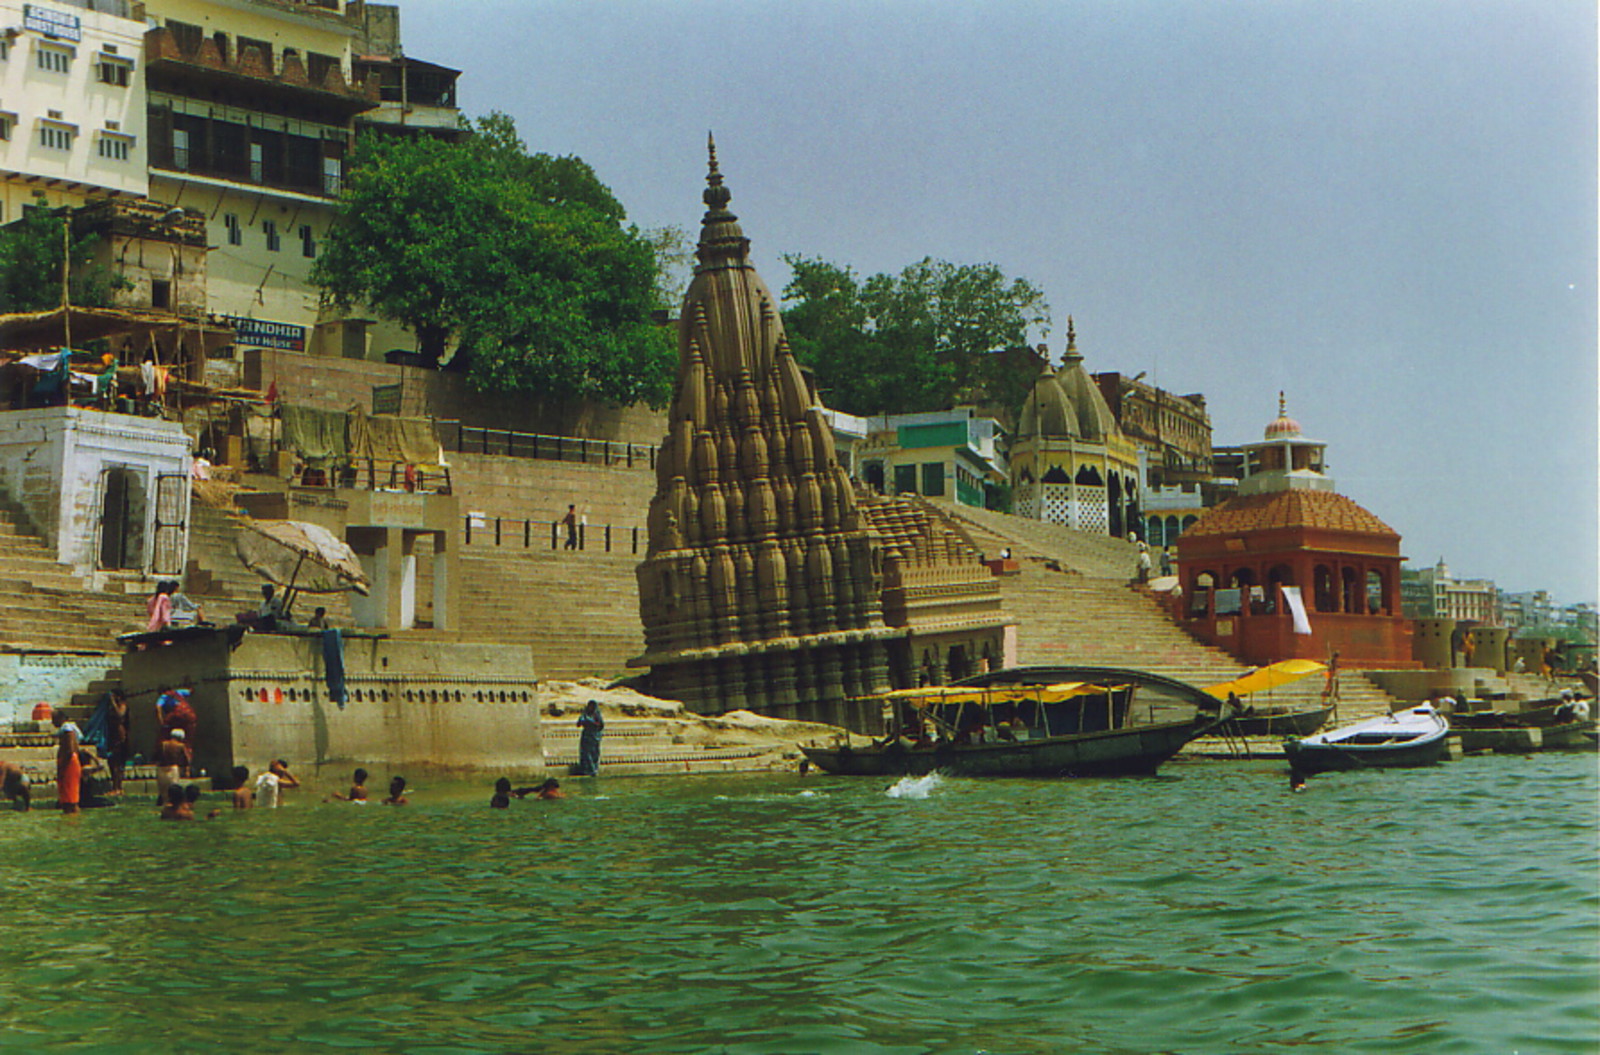 A temple sliding into the Ganges